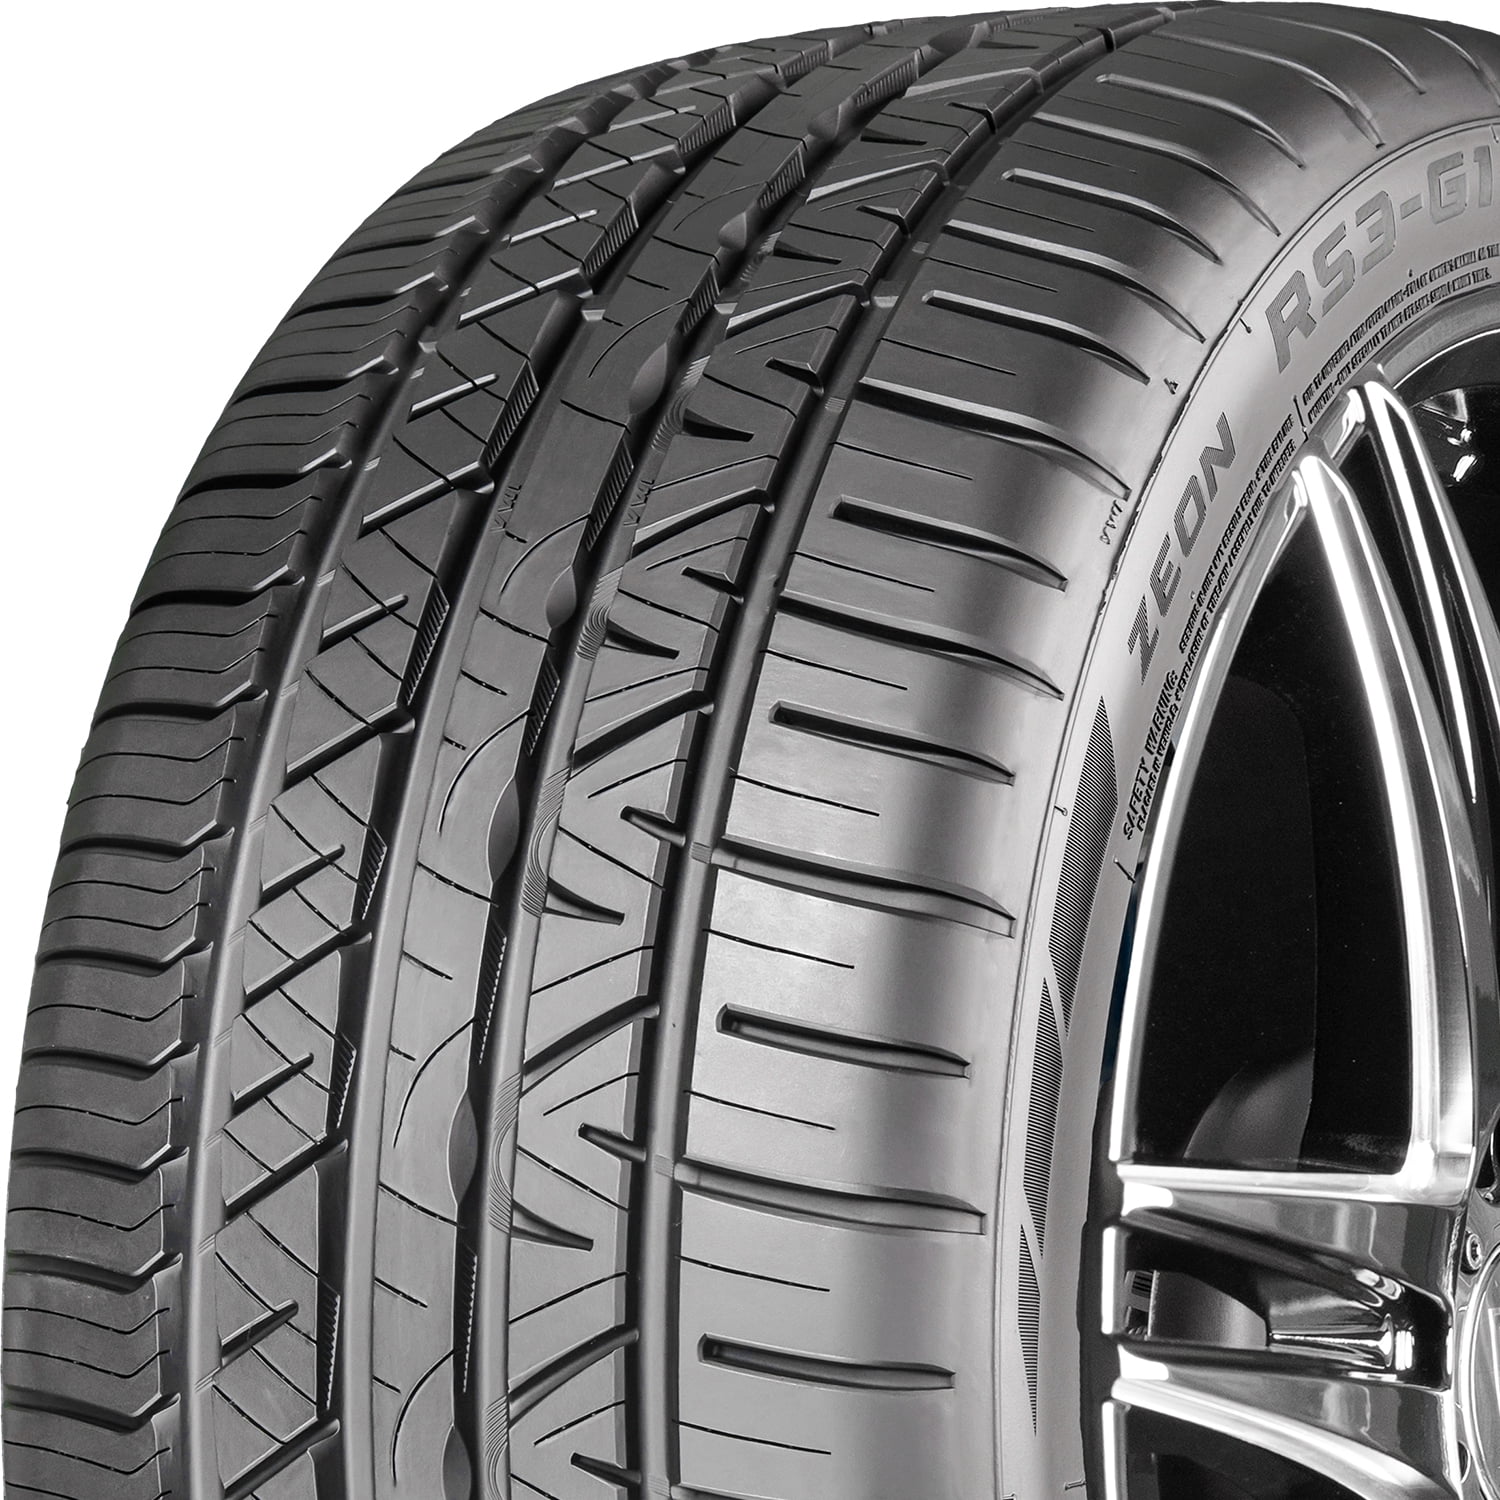 Set of 4 (FOUR) Cooper Zeon RS3-G1 215/45R18 93W XL A/S High 